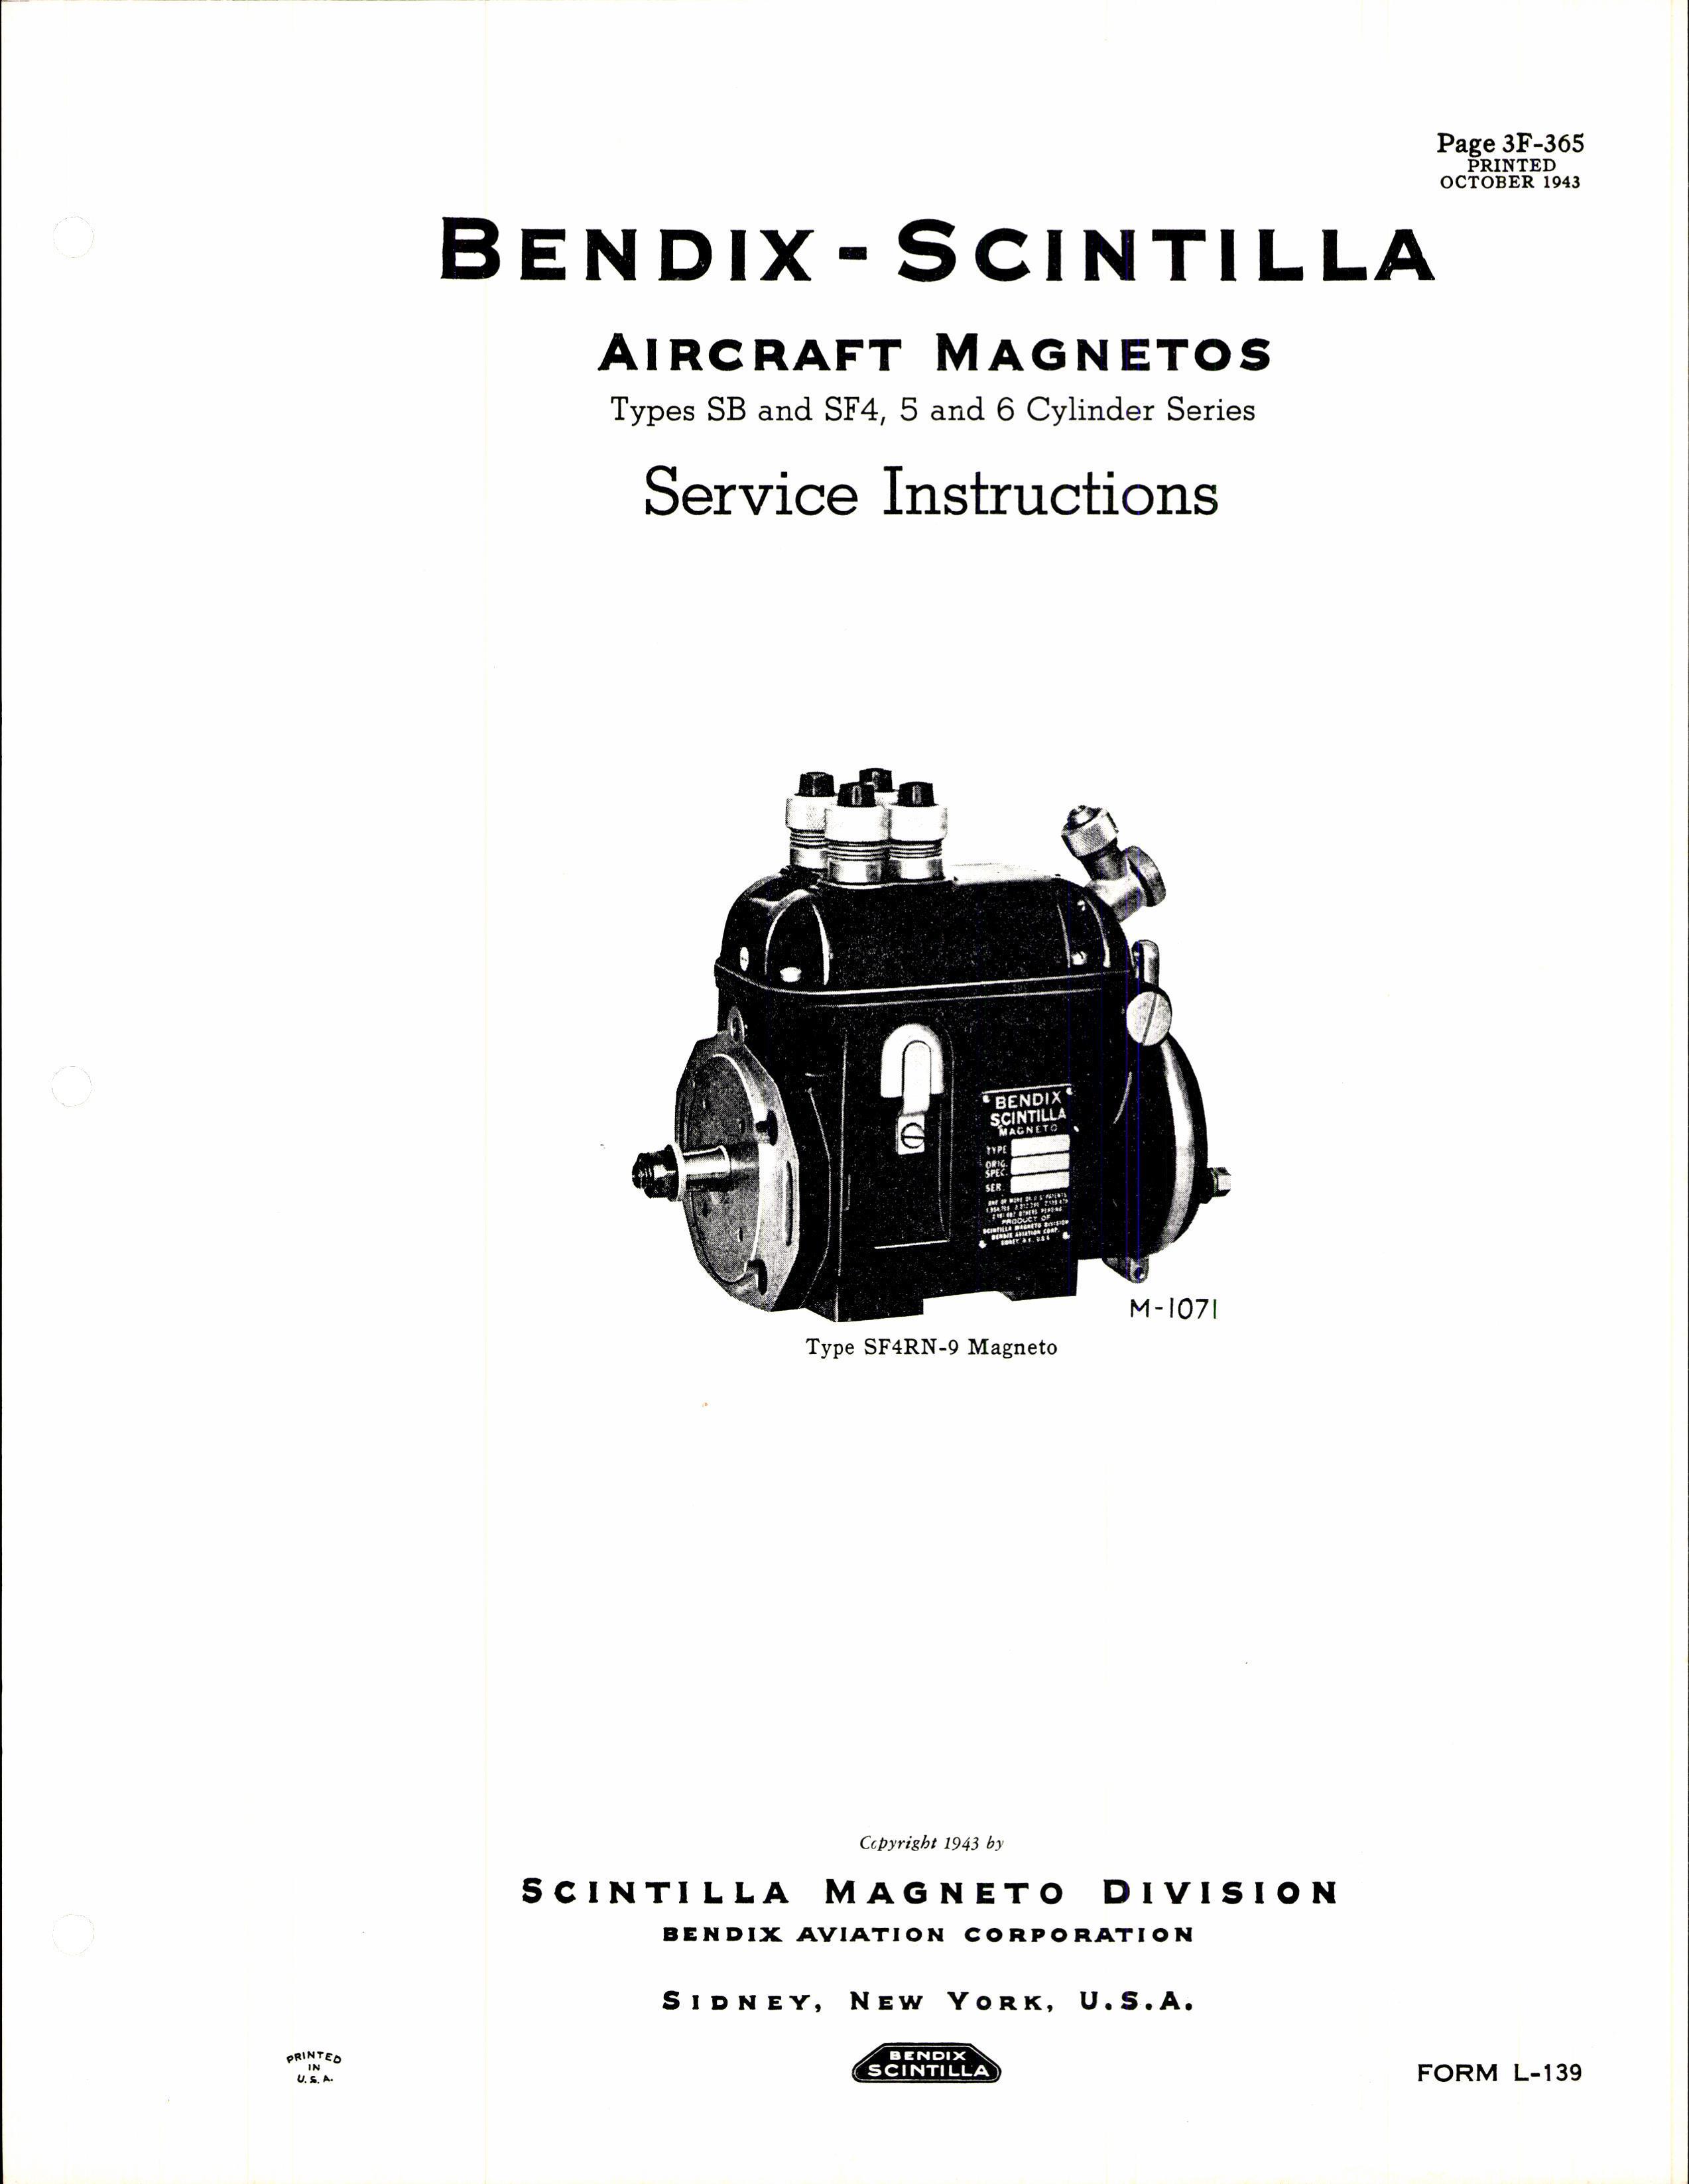 Sample page 1 from AirCorps Library document: Service Instructions for Bendix-Scintilla Aircraft Magnetos Types SB and SF